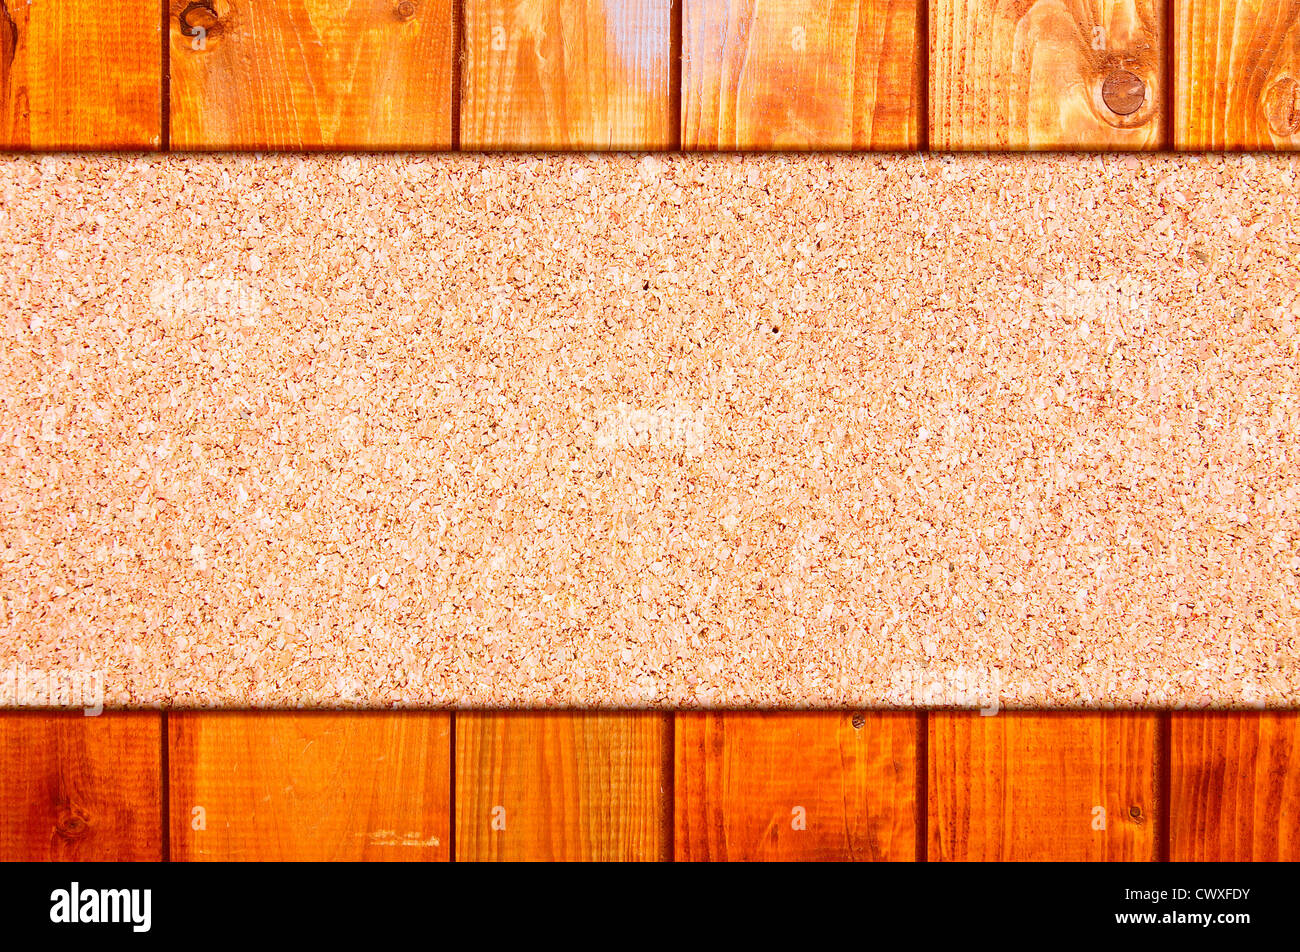 Cork board at wooden panel wall interior background Stock Photo